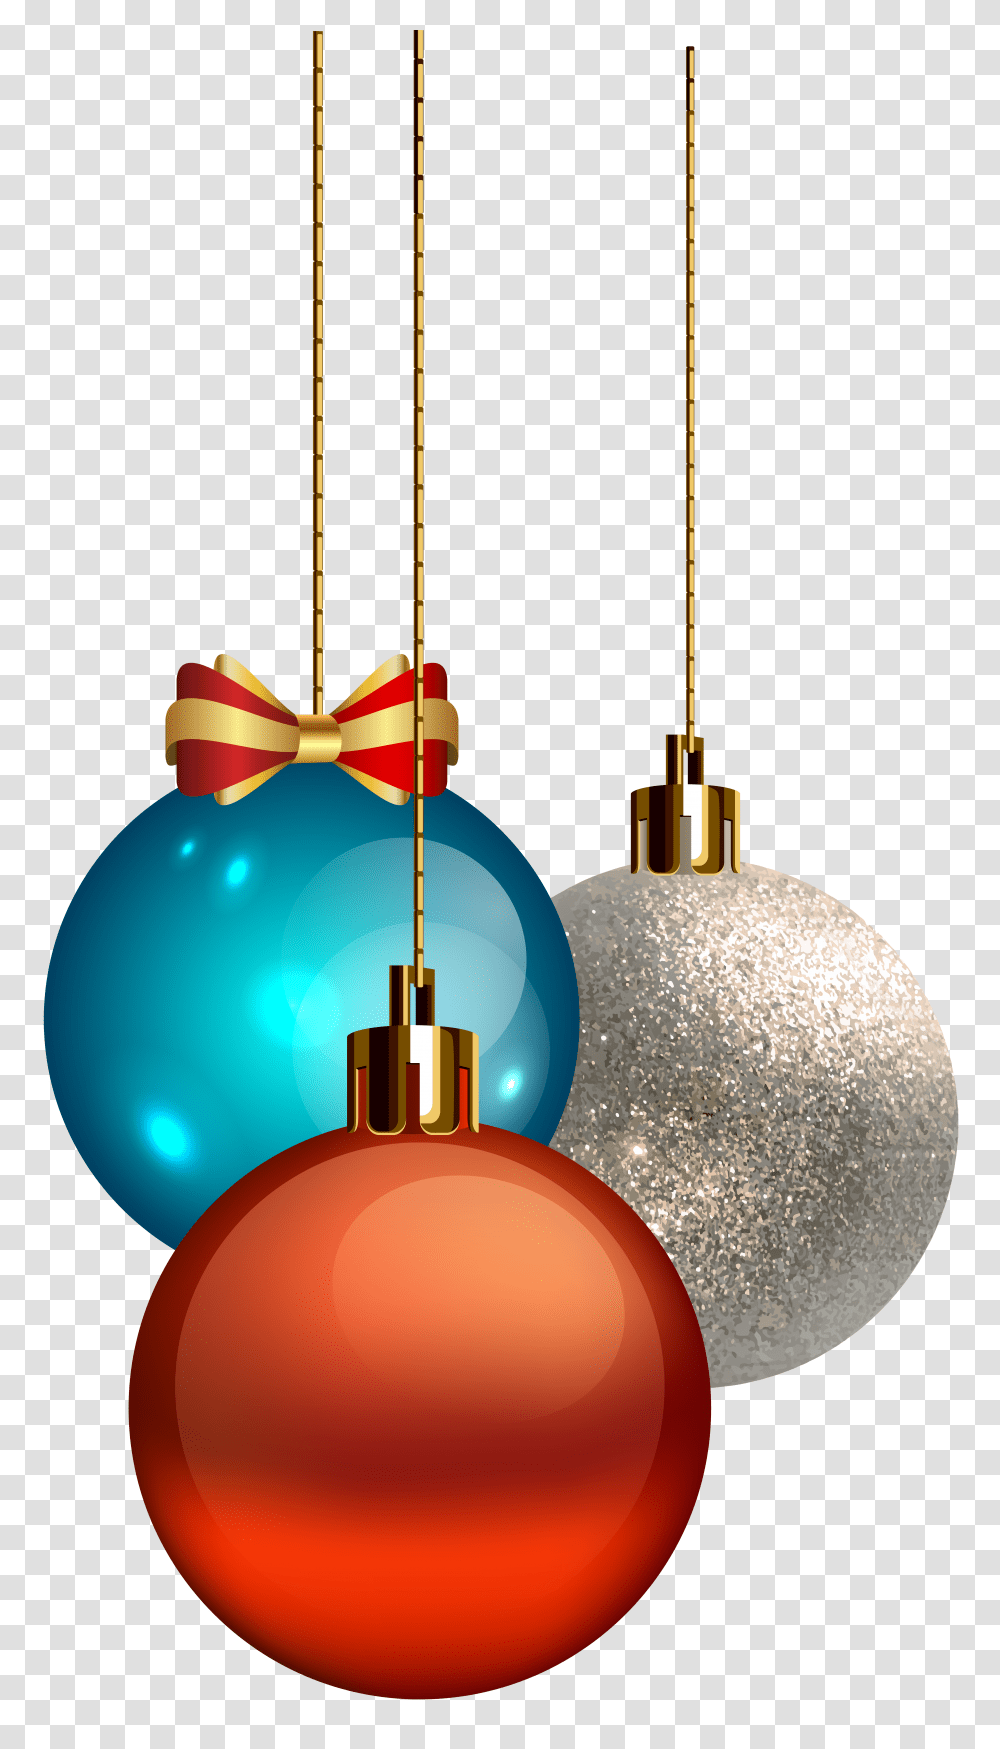 Christmas Ball With Transparant Christmas Balls Background Transparent Png